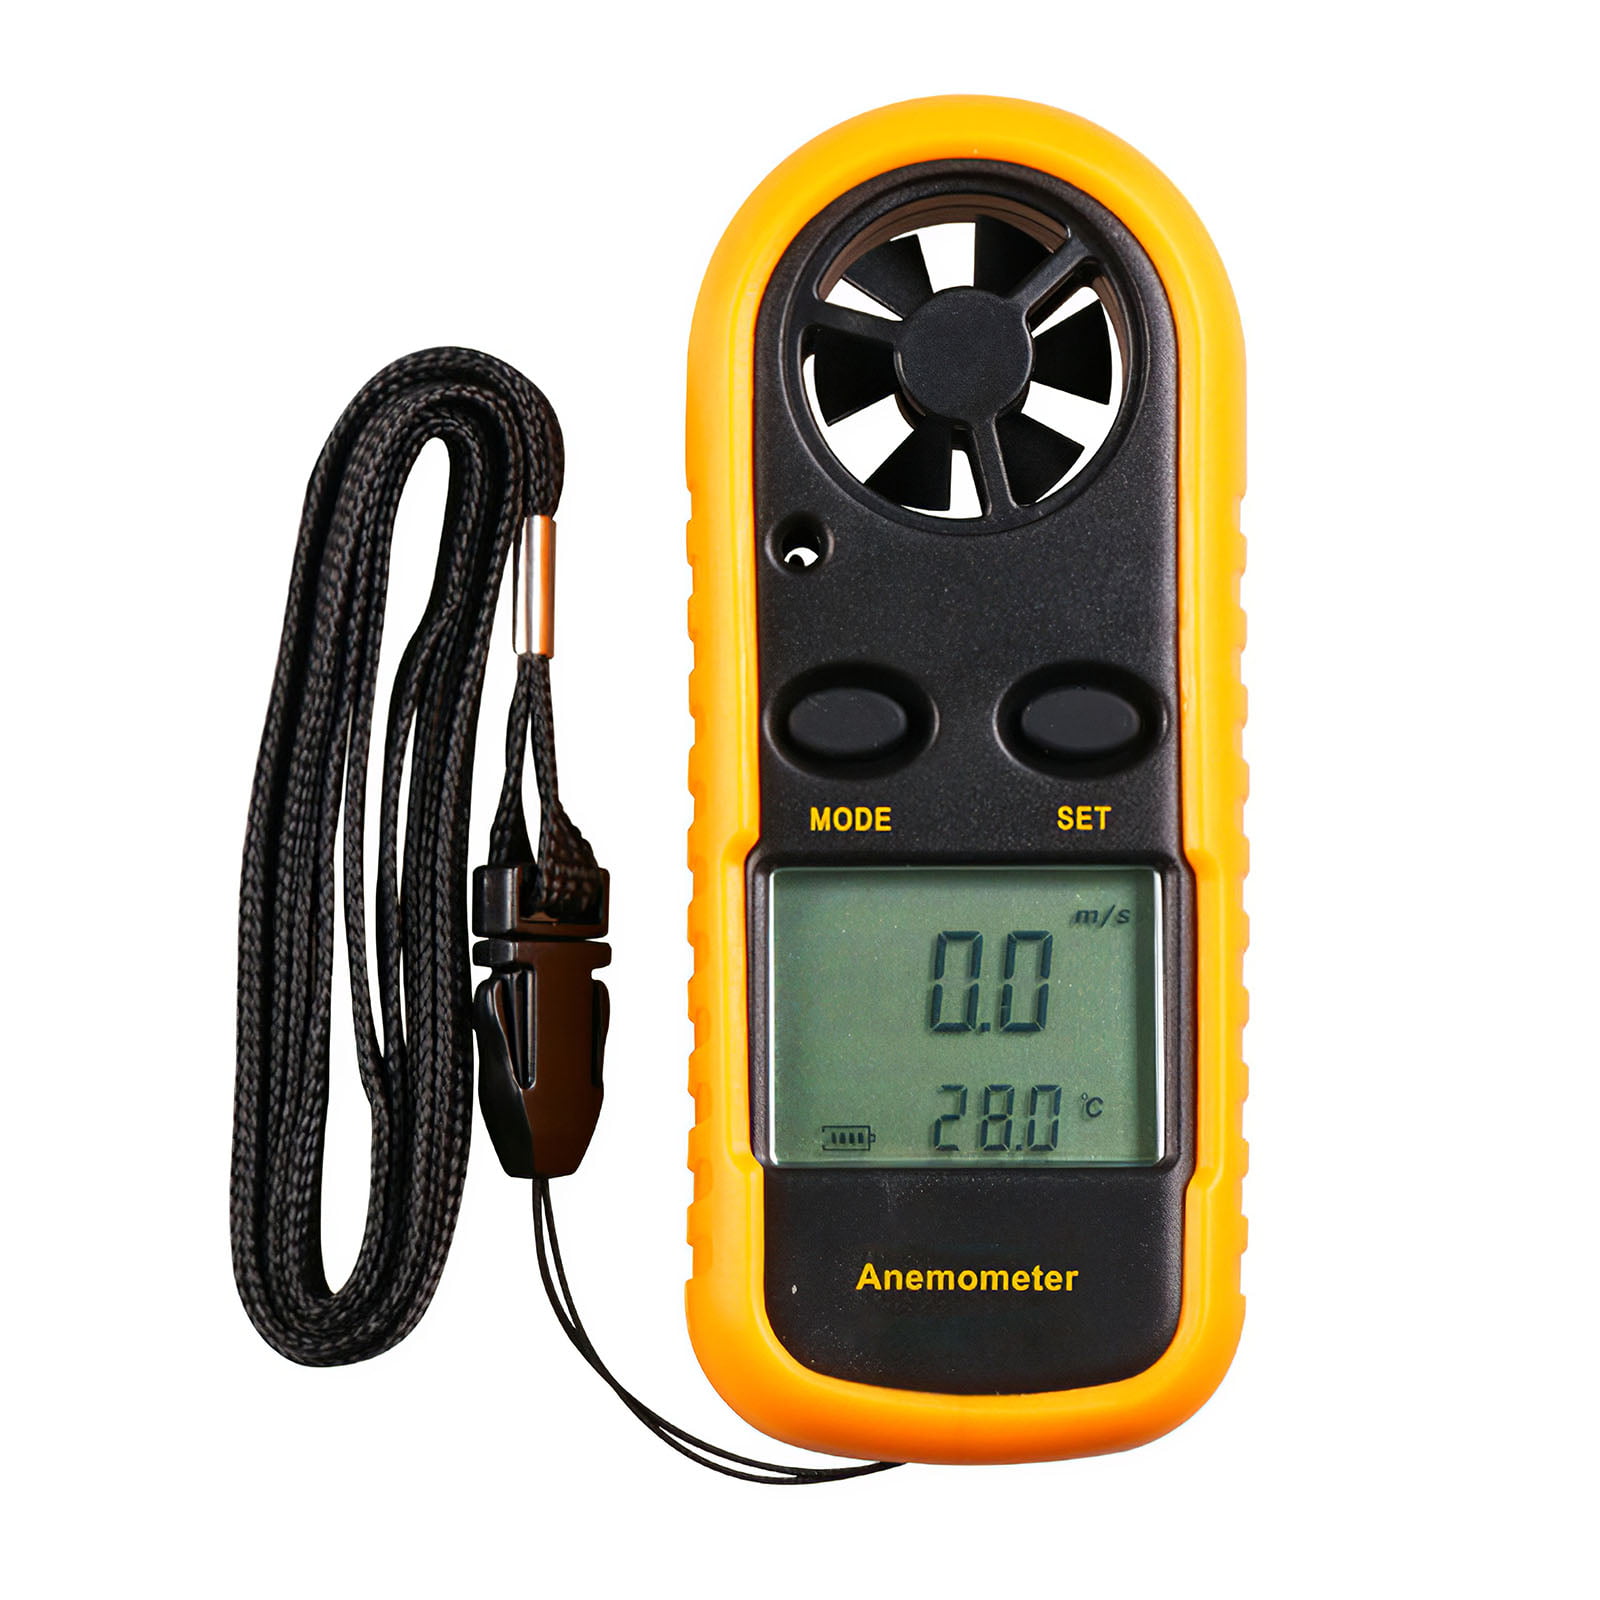 Portable Handheld Digital Anemometer Can Be Used for Kite Surfing Kite Fishing 